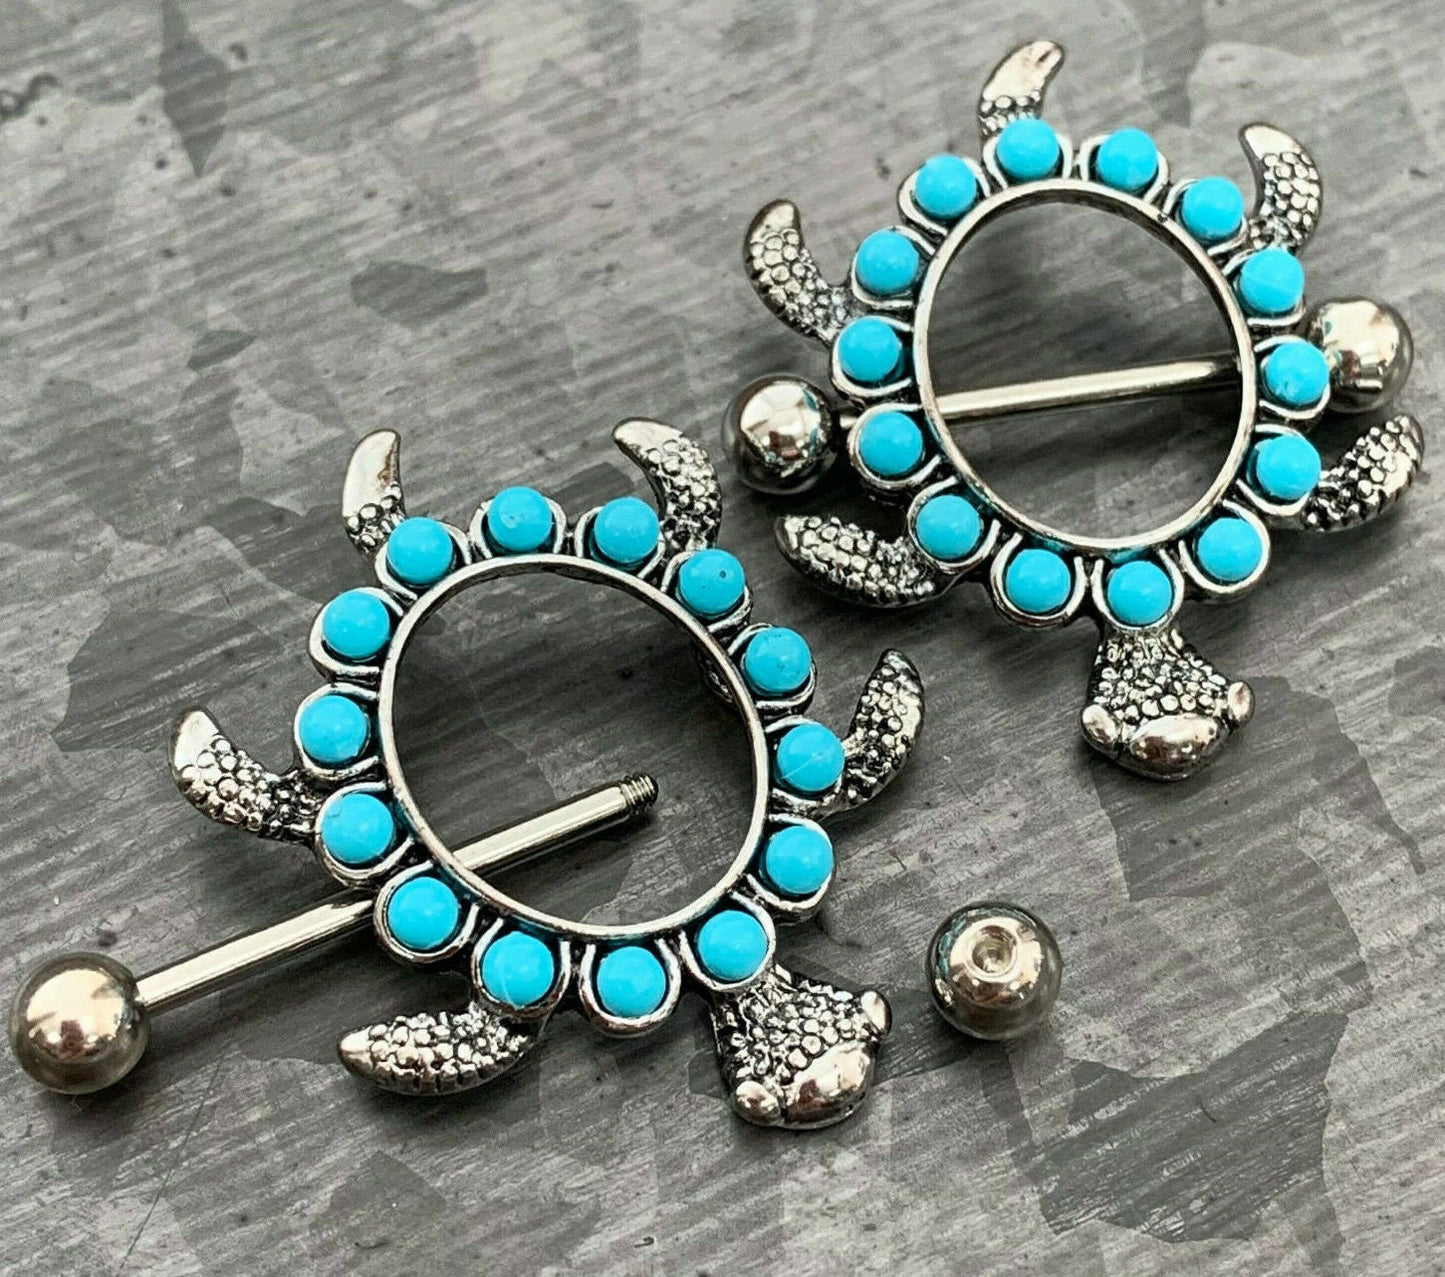 PAIR of Unique Teal Turtle Design Steel Nipple Barbells/Shields/Rings - Barbell 14g, 19mm (3/4") - Wearable length 12mm(1/2") x 14mm(9/16")!